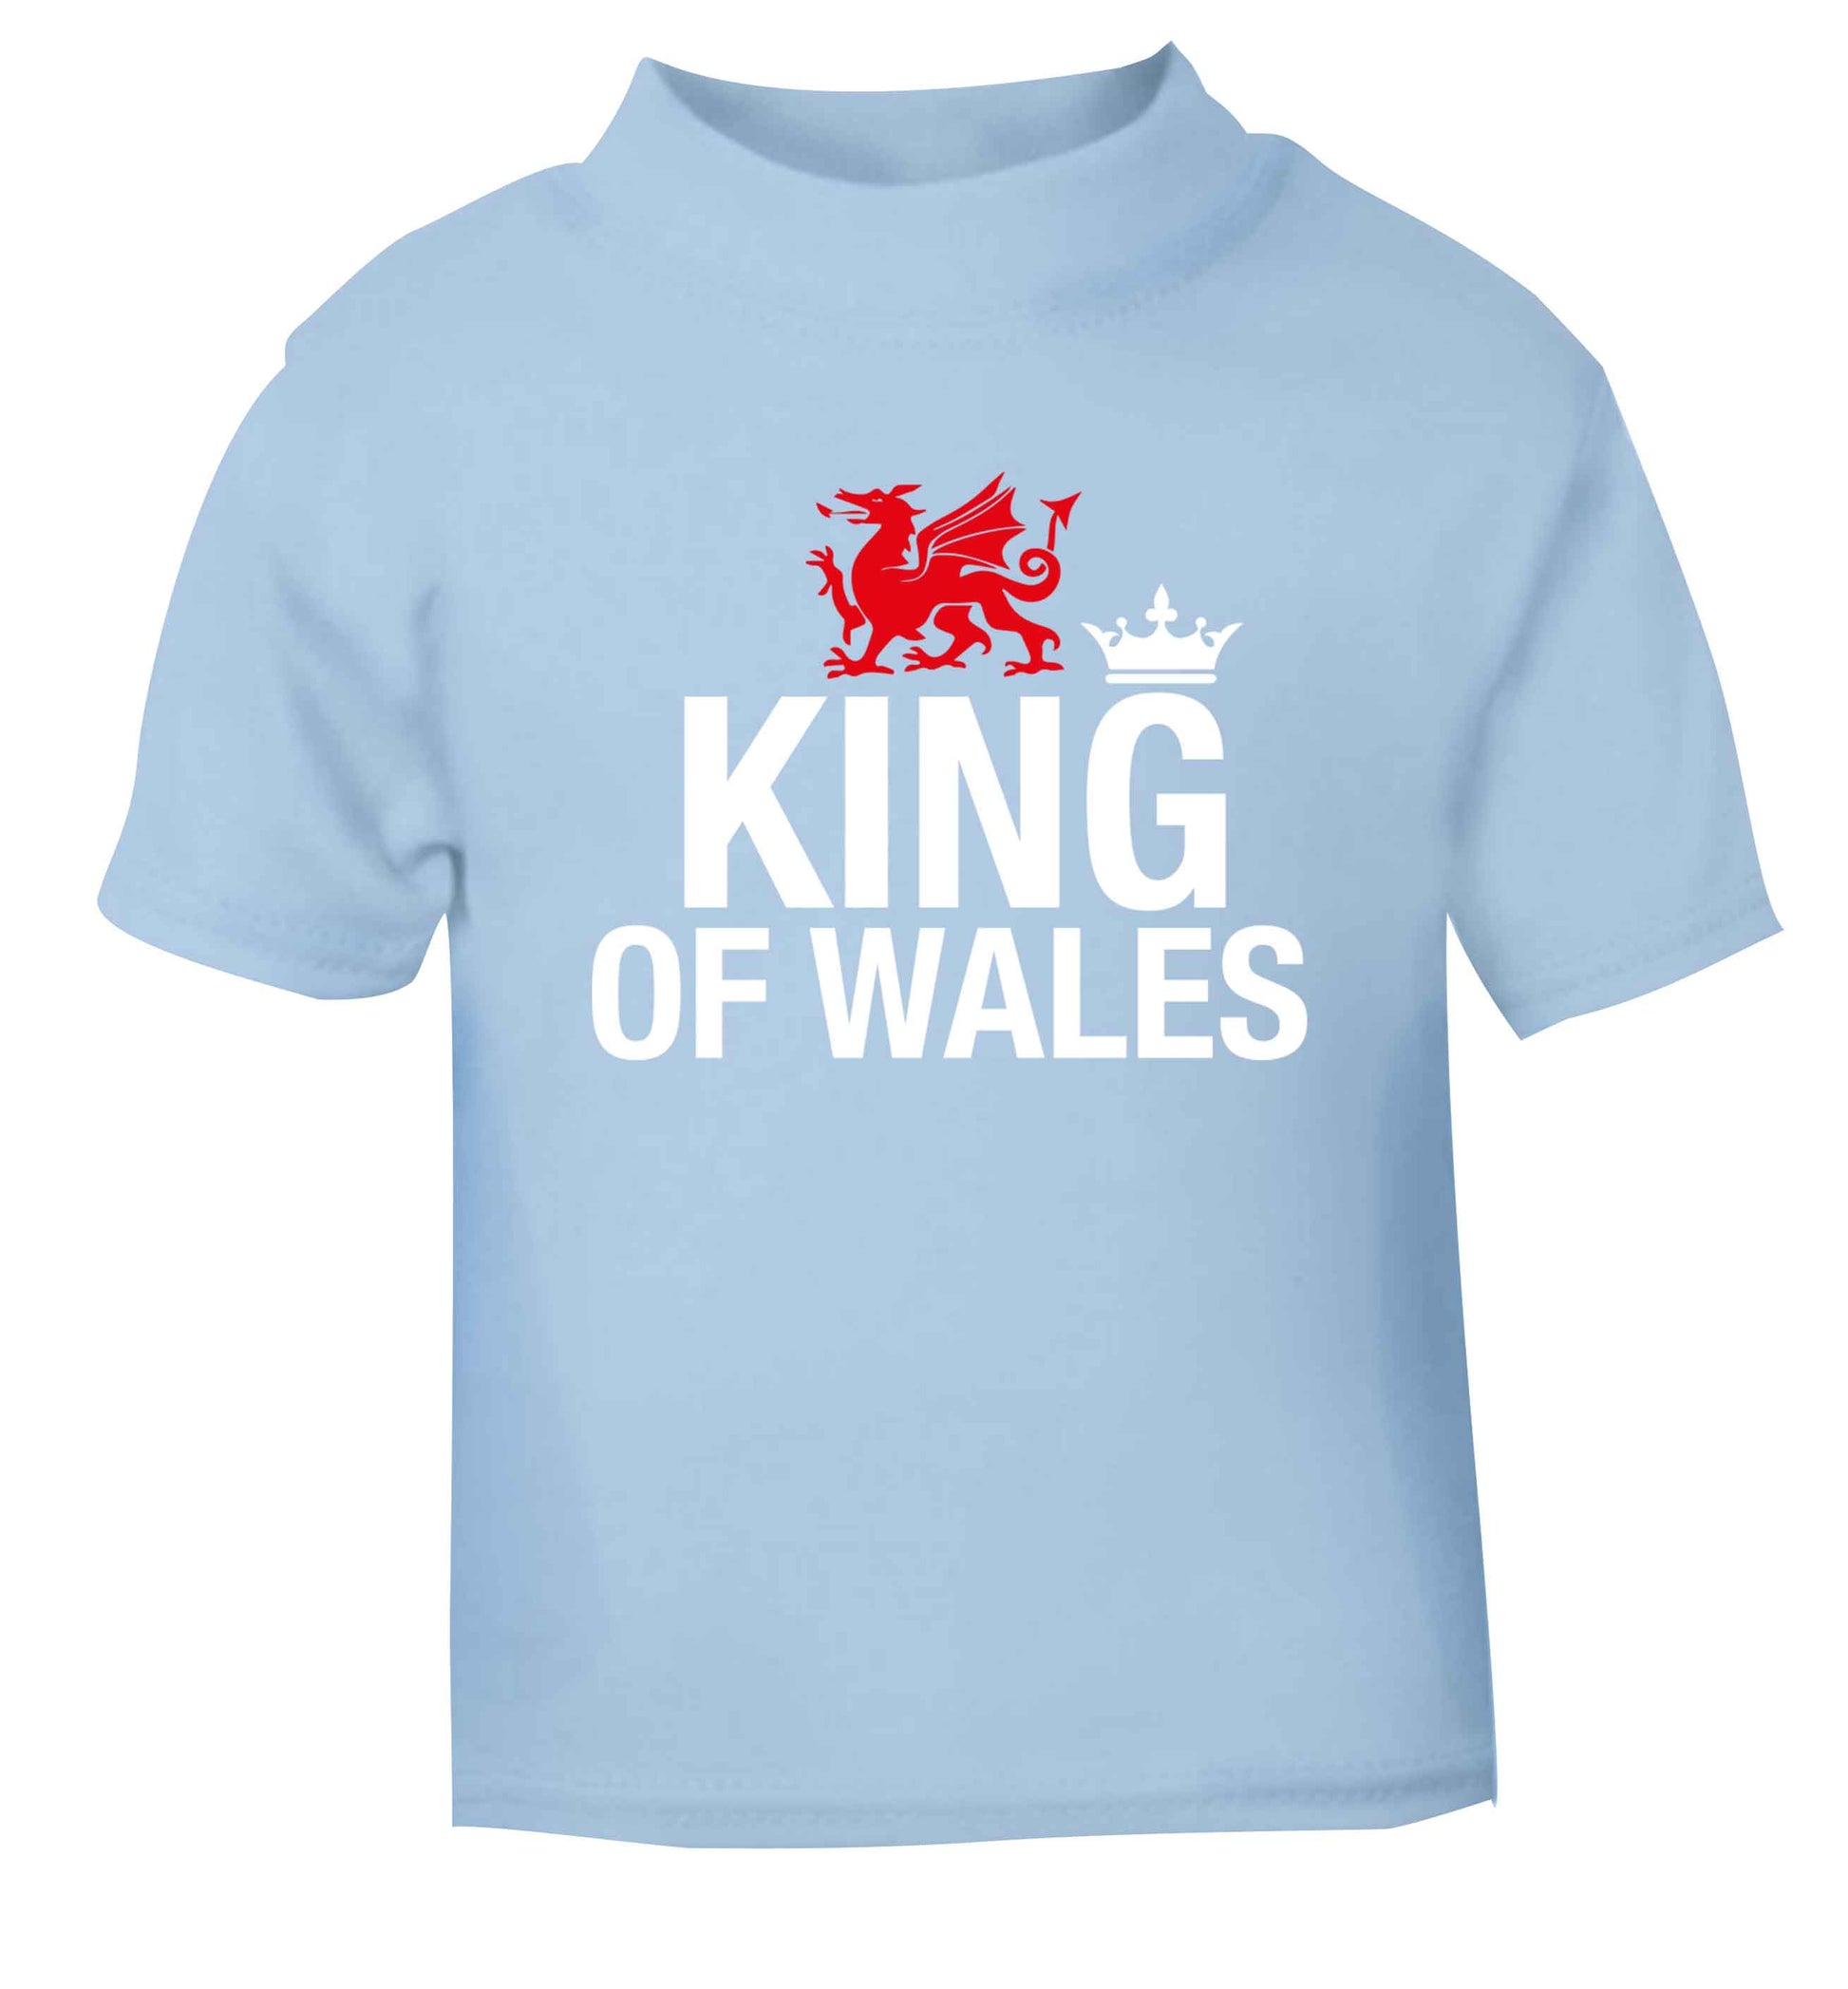 King of Wales light blue Baby Toddler Tshirt 2 Years